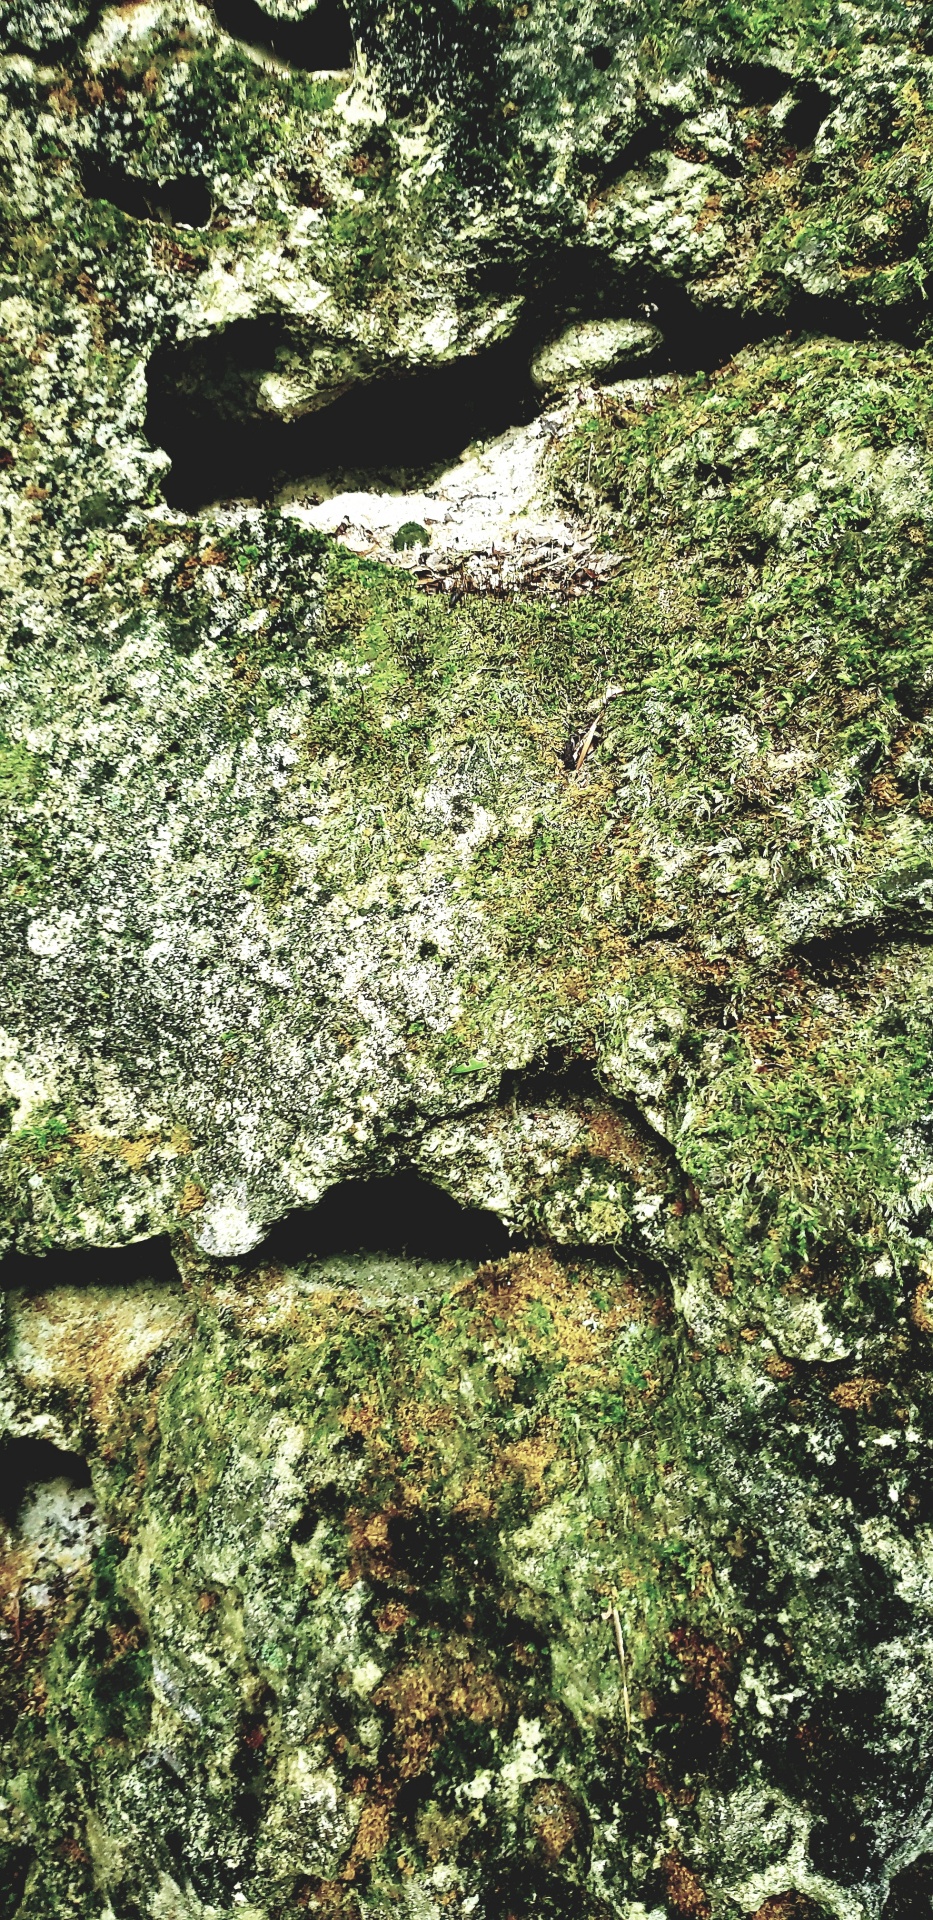 An aged rock with holes, cracks, and moss